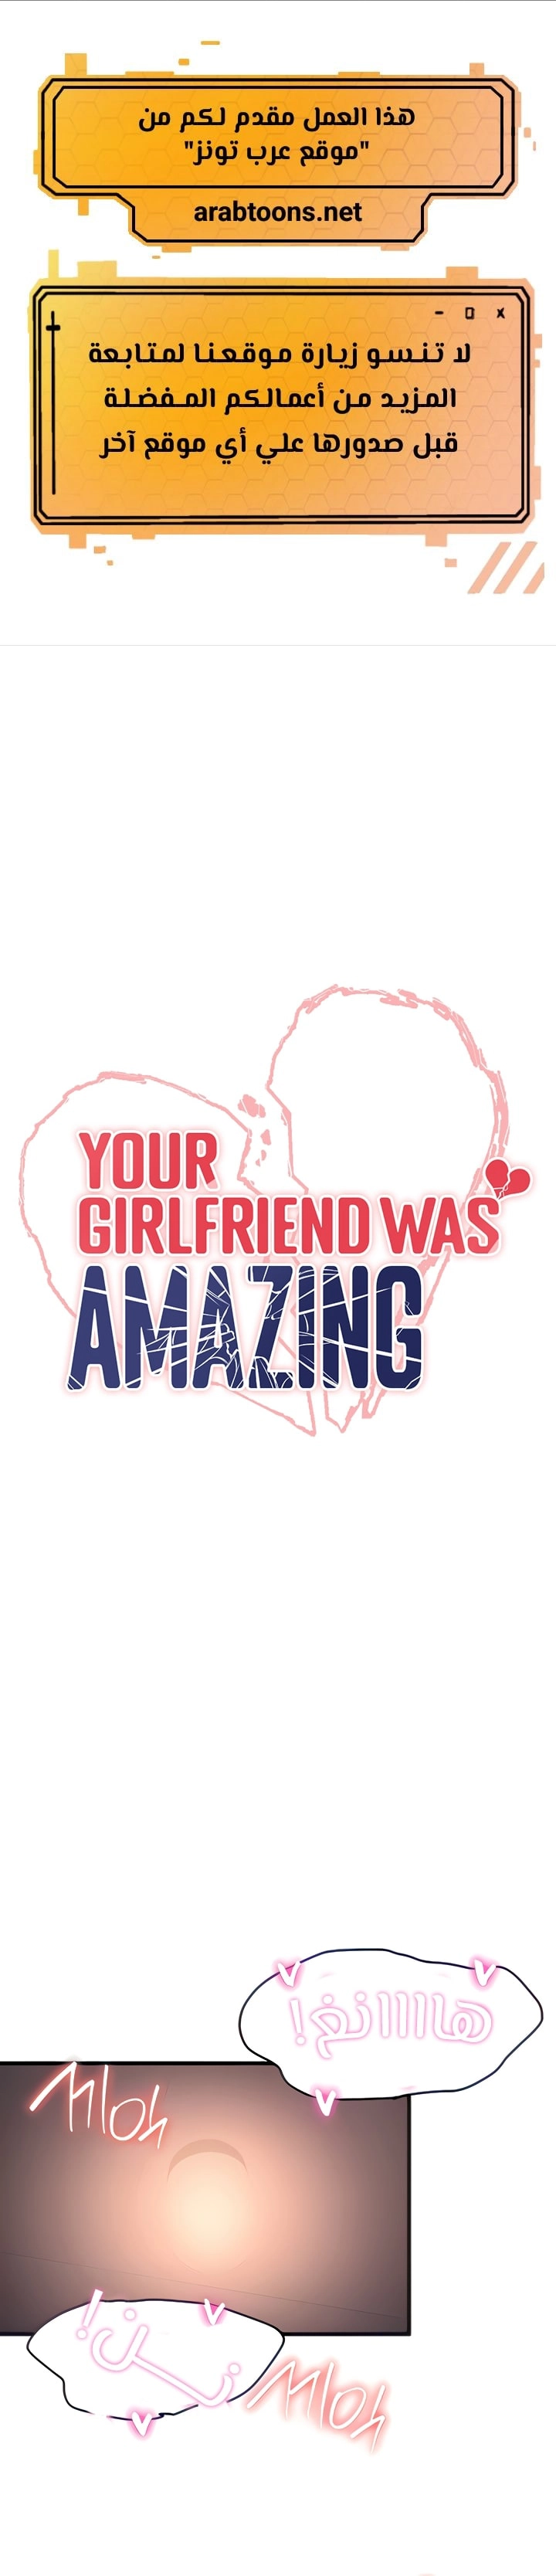 Your Girlfriend Was Amazing - 18 - 65c22e64a6a1f.webp